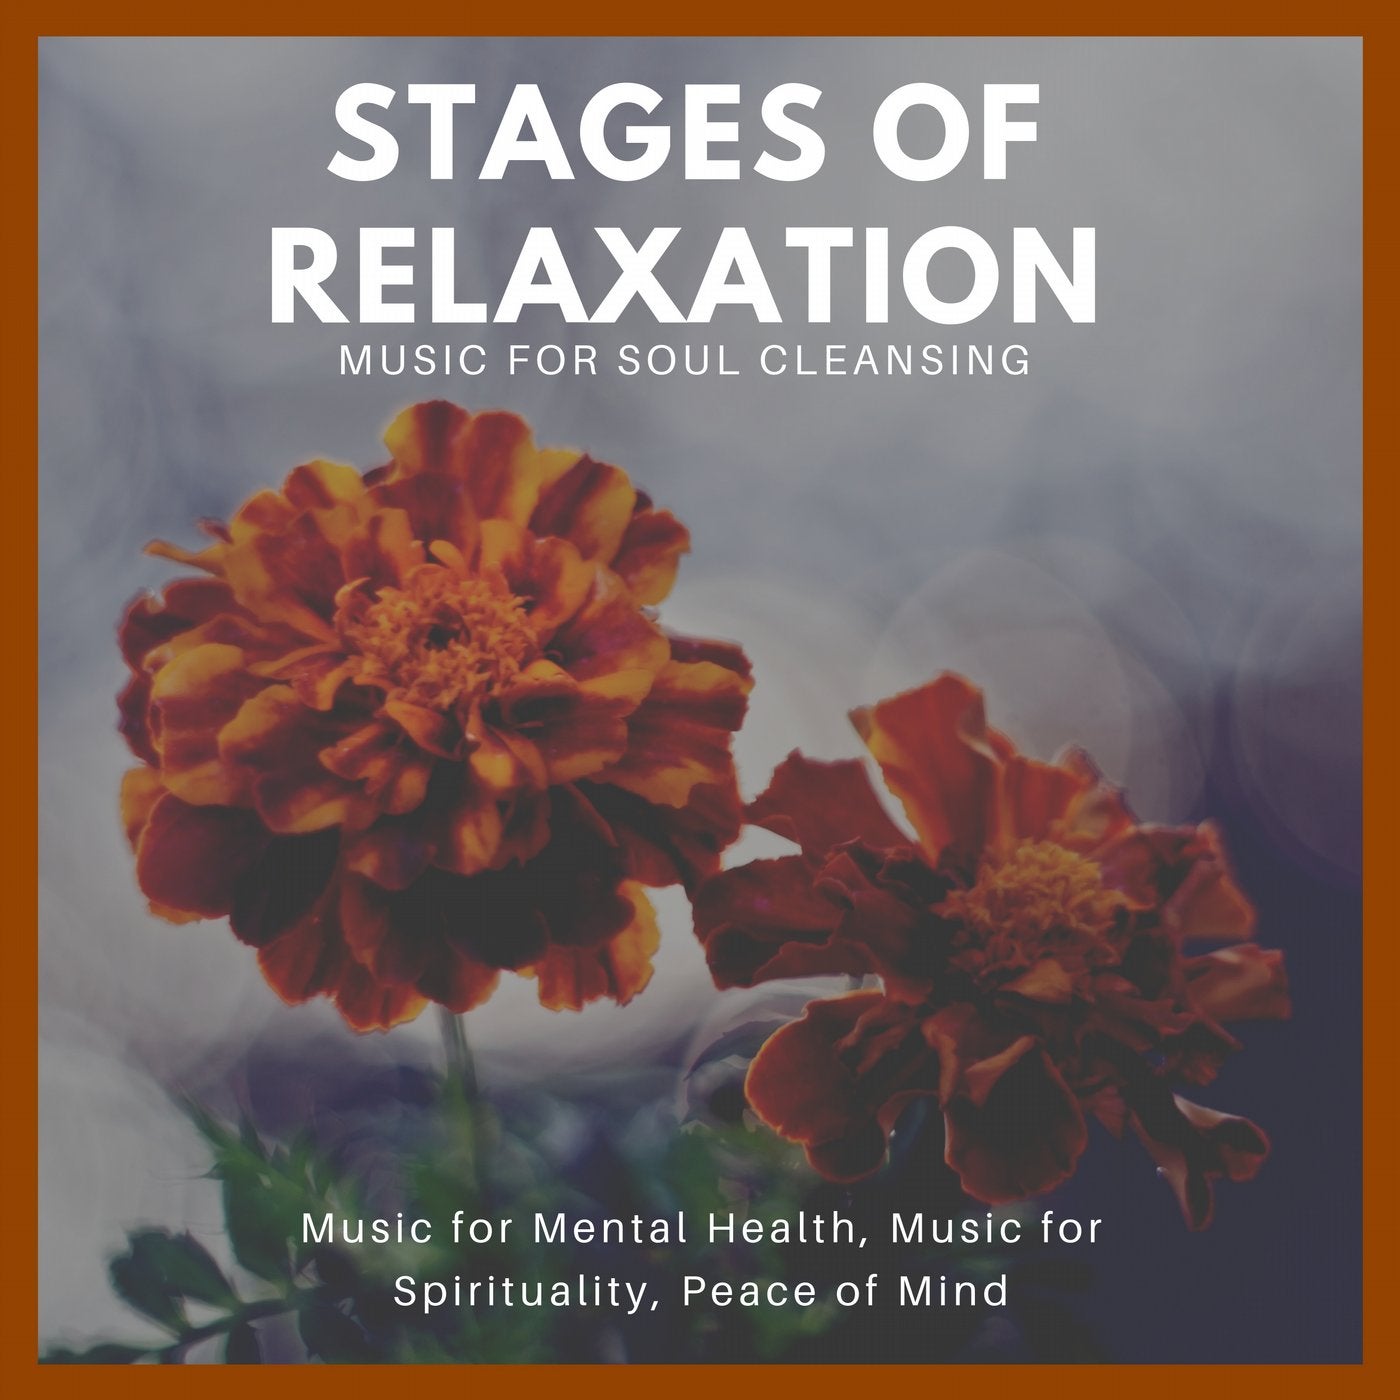 Stages Of Relaxation (Music For Soul Cleansing, Music For Mental Health, Music For Spirituality, Peace Of Mind)